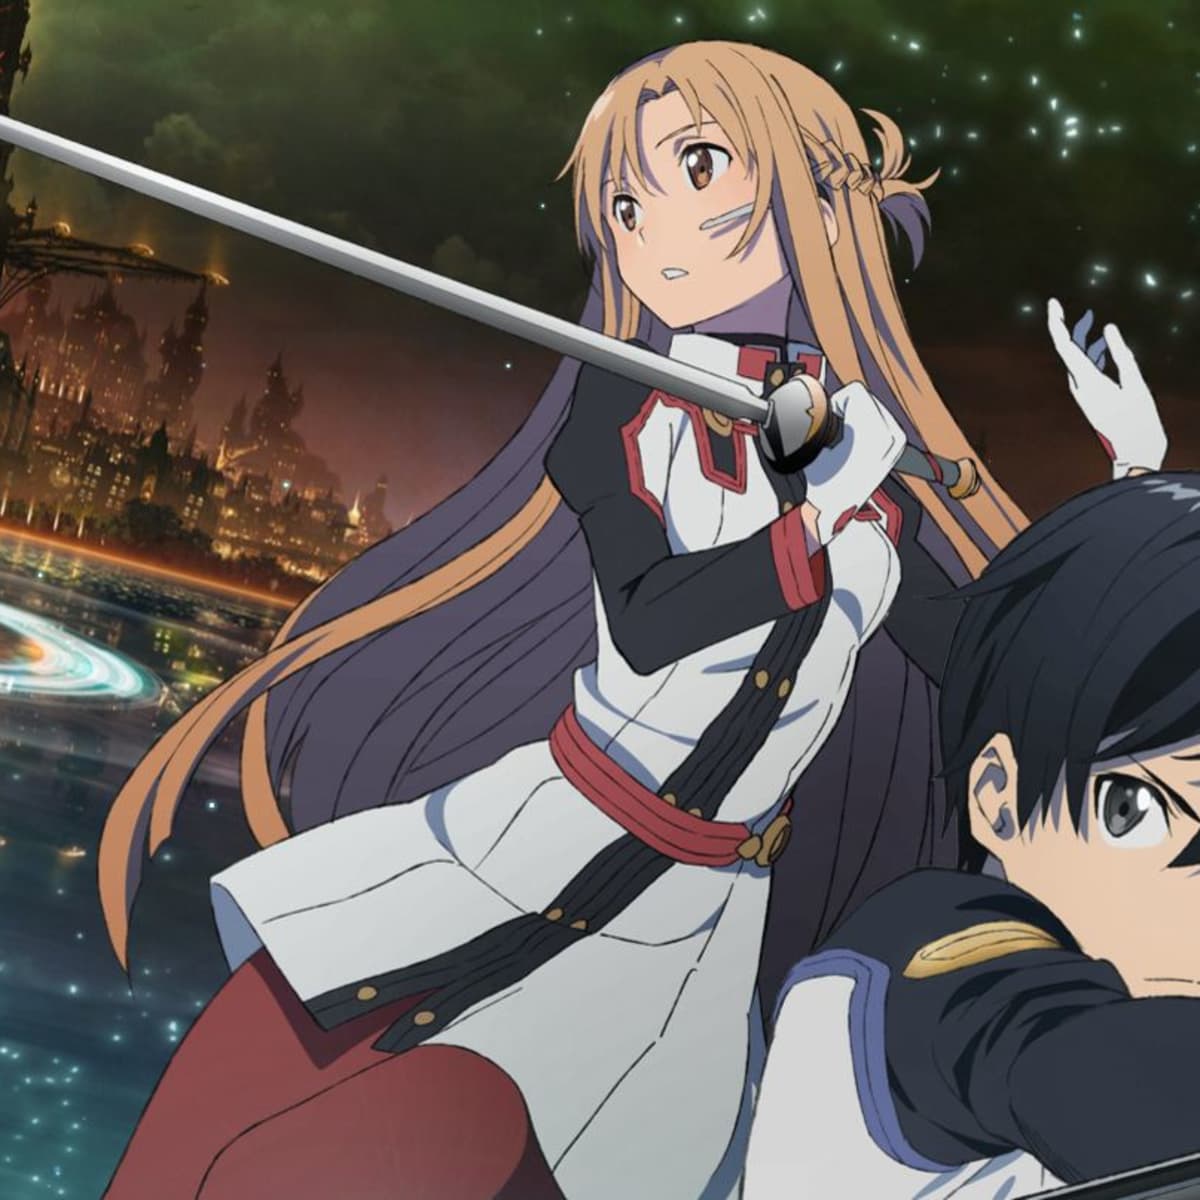 Sword Art Online The Movie: Ordinal Scale (Anime) - TV Tropes